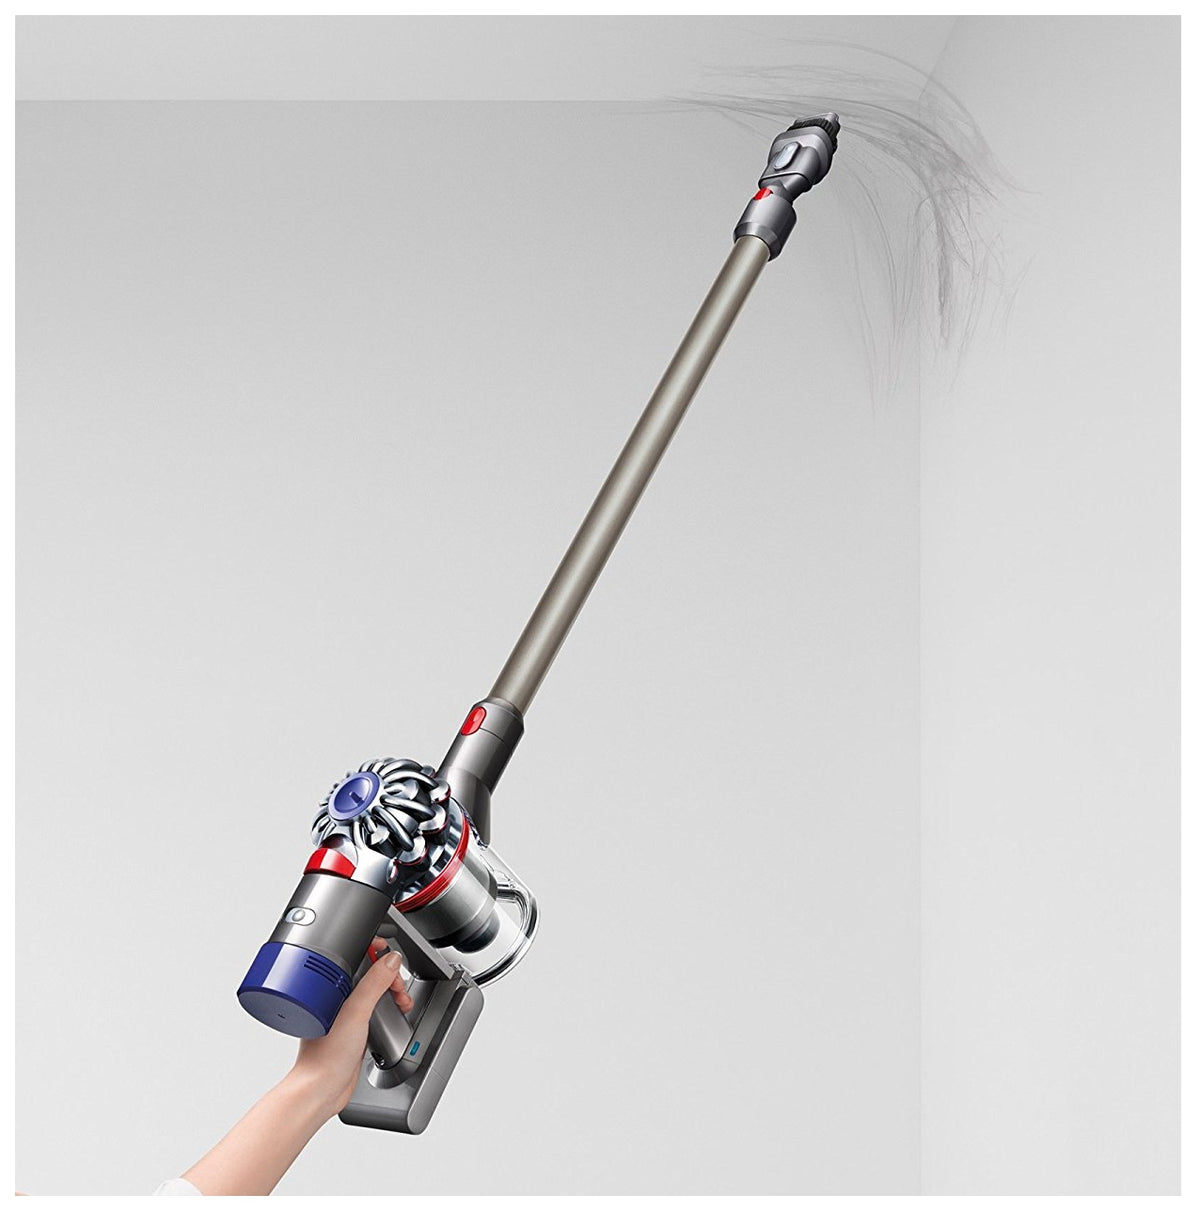 Buy dyson 229602-01 - Online store for vacuums & floor equipment, stick in USA, on sale, low price, discount deals, coupon code